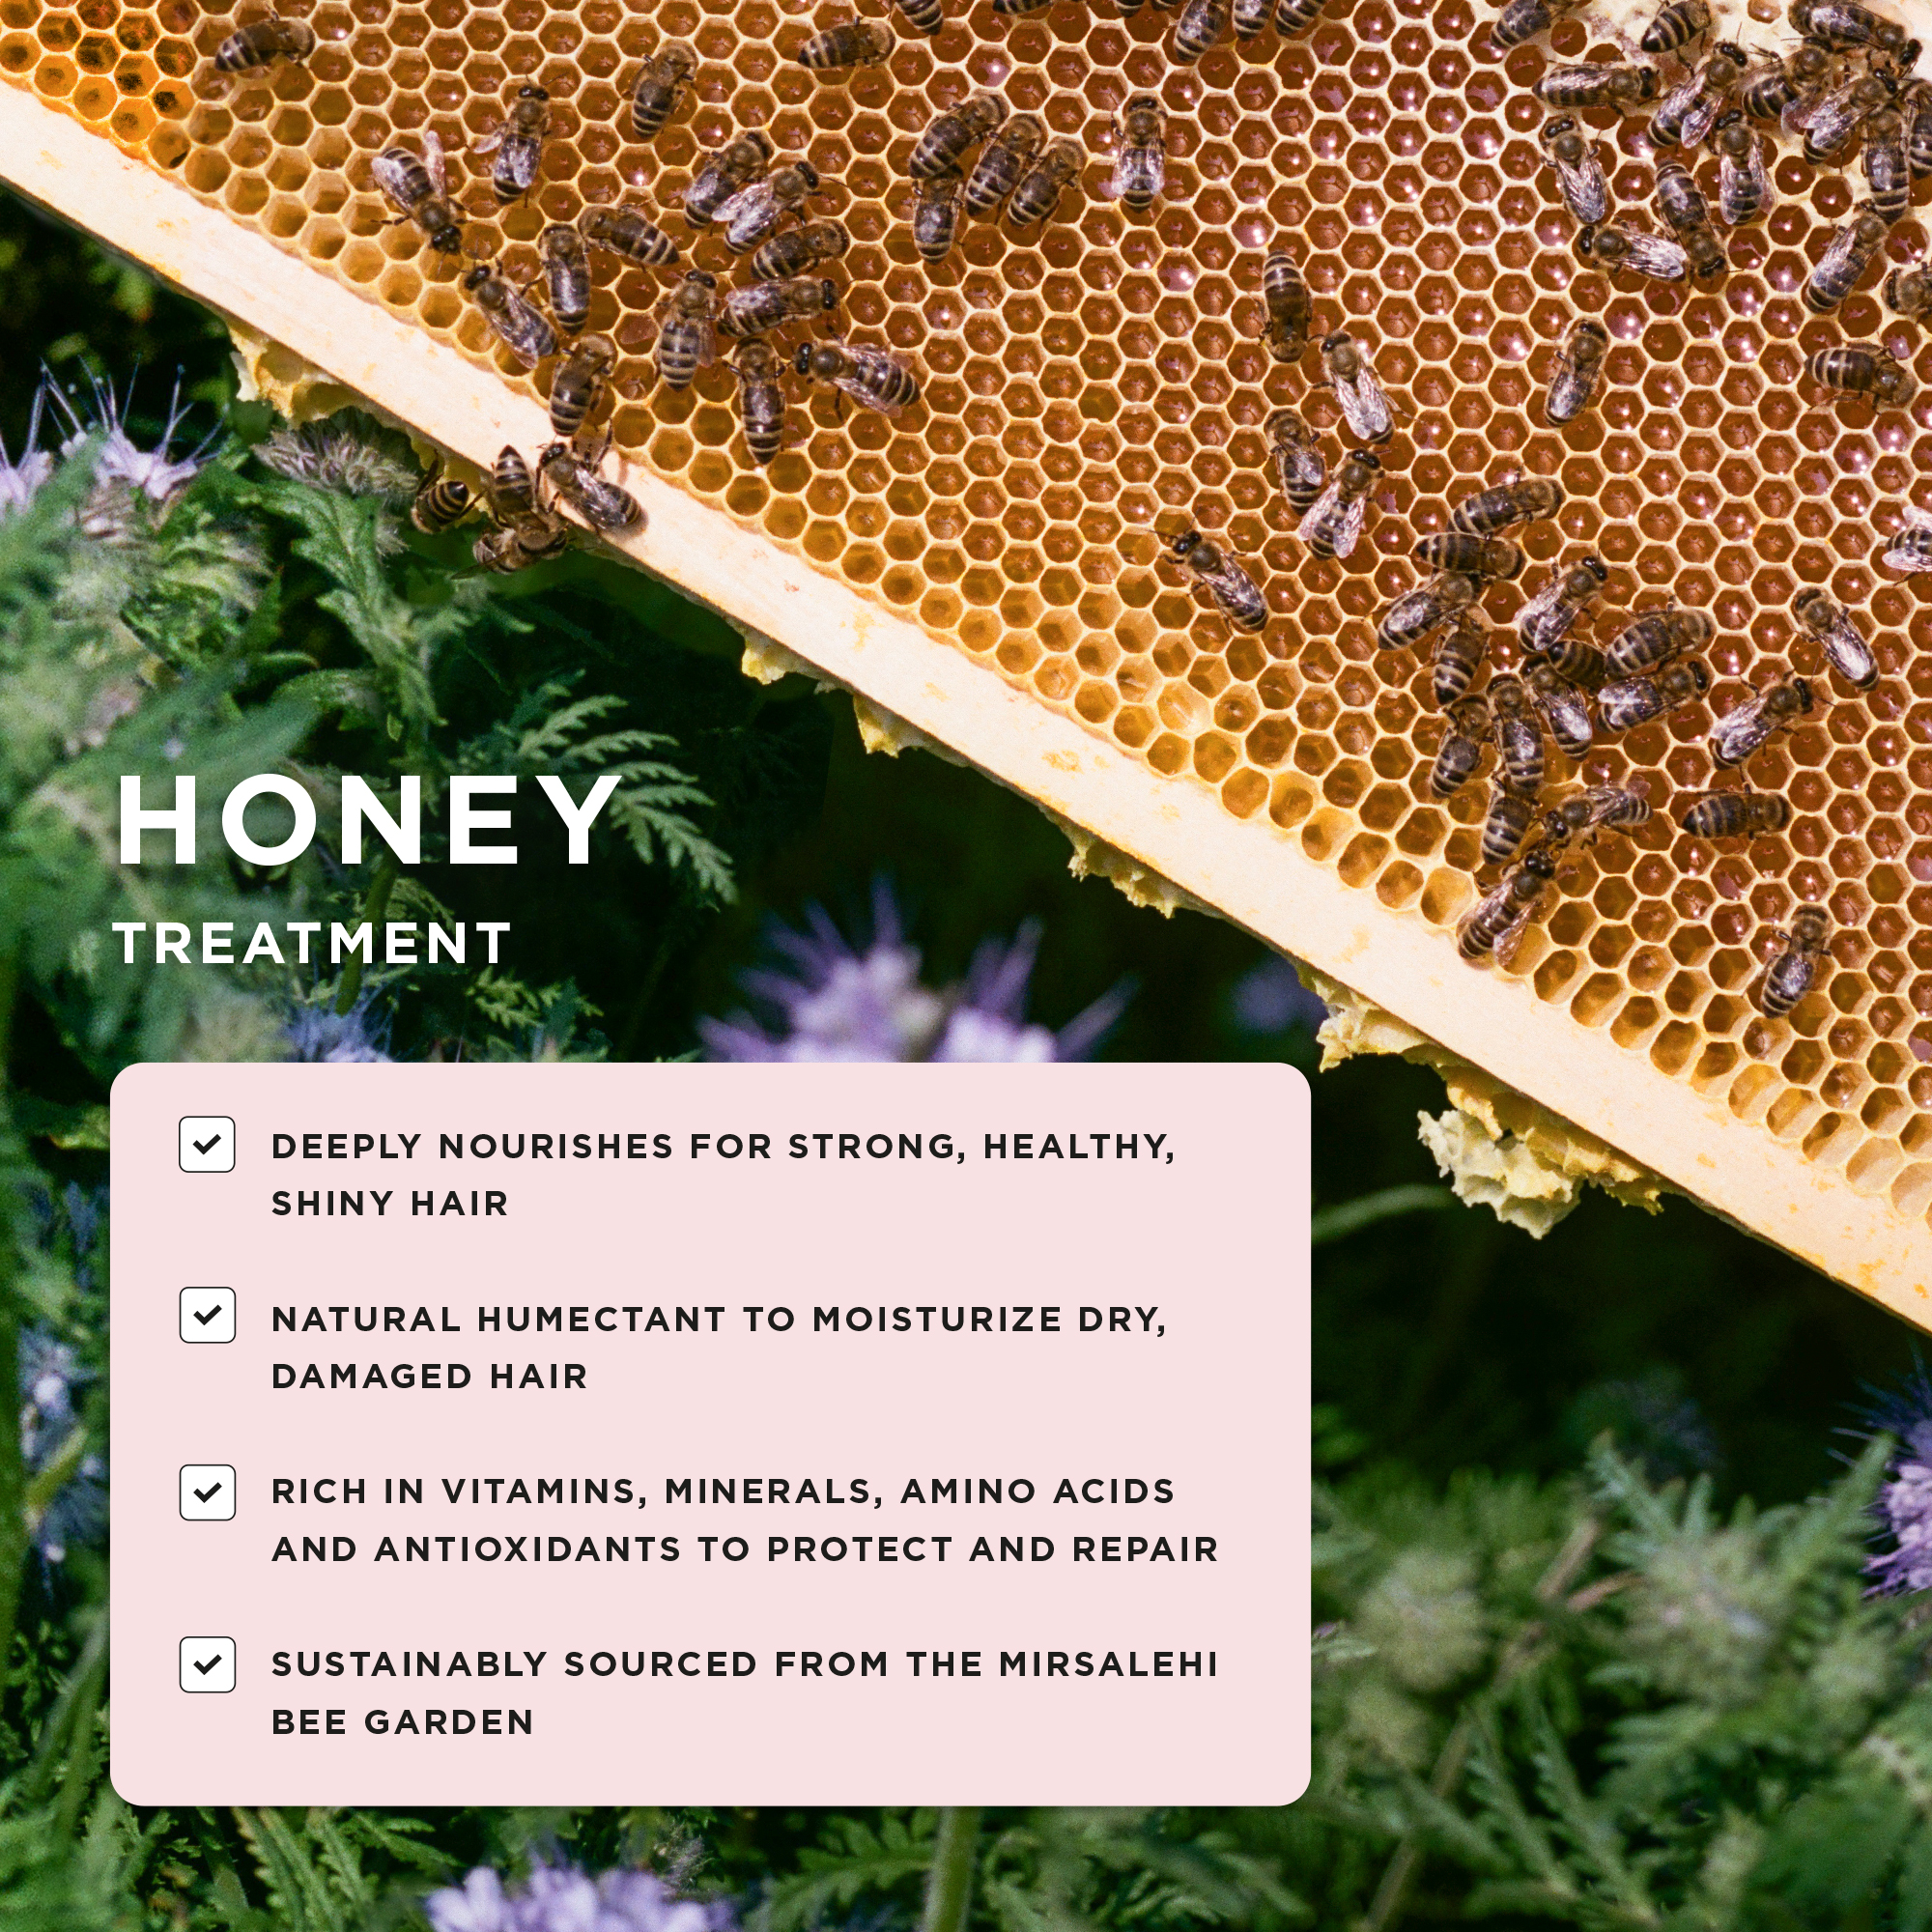 Honey Treatment, deeply nourishes for strong, healthy, shiny hair, natural humectant to moisturize dry, damaged hair, rich in vitamins, minerals, amino acids and antioxidants to protect and repair, sustainably sourced from the mirsalehi bee garden